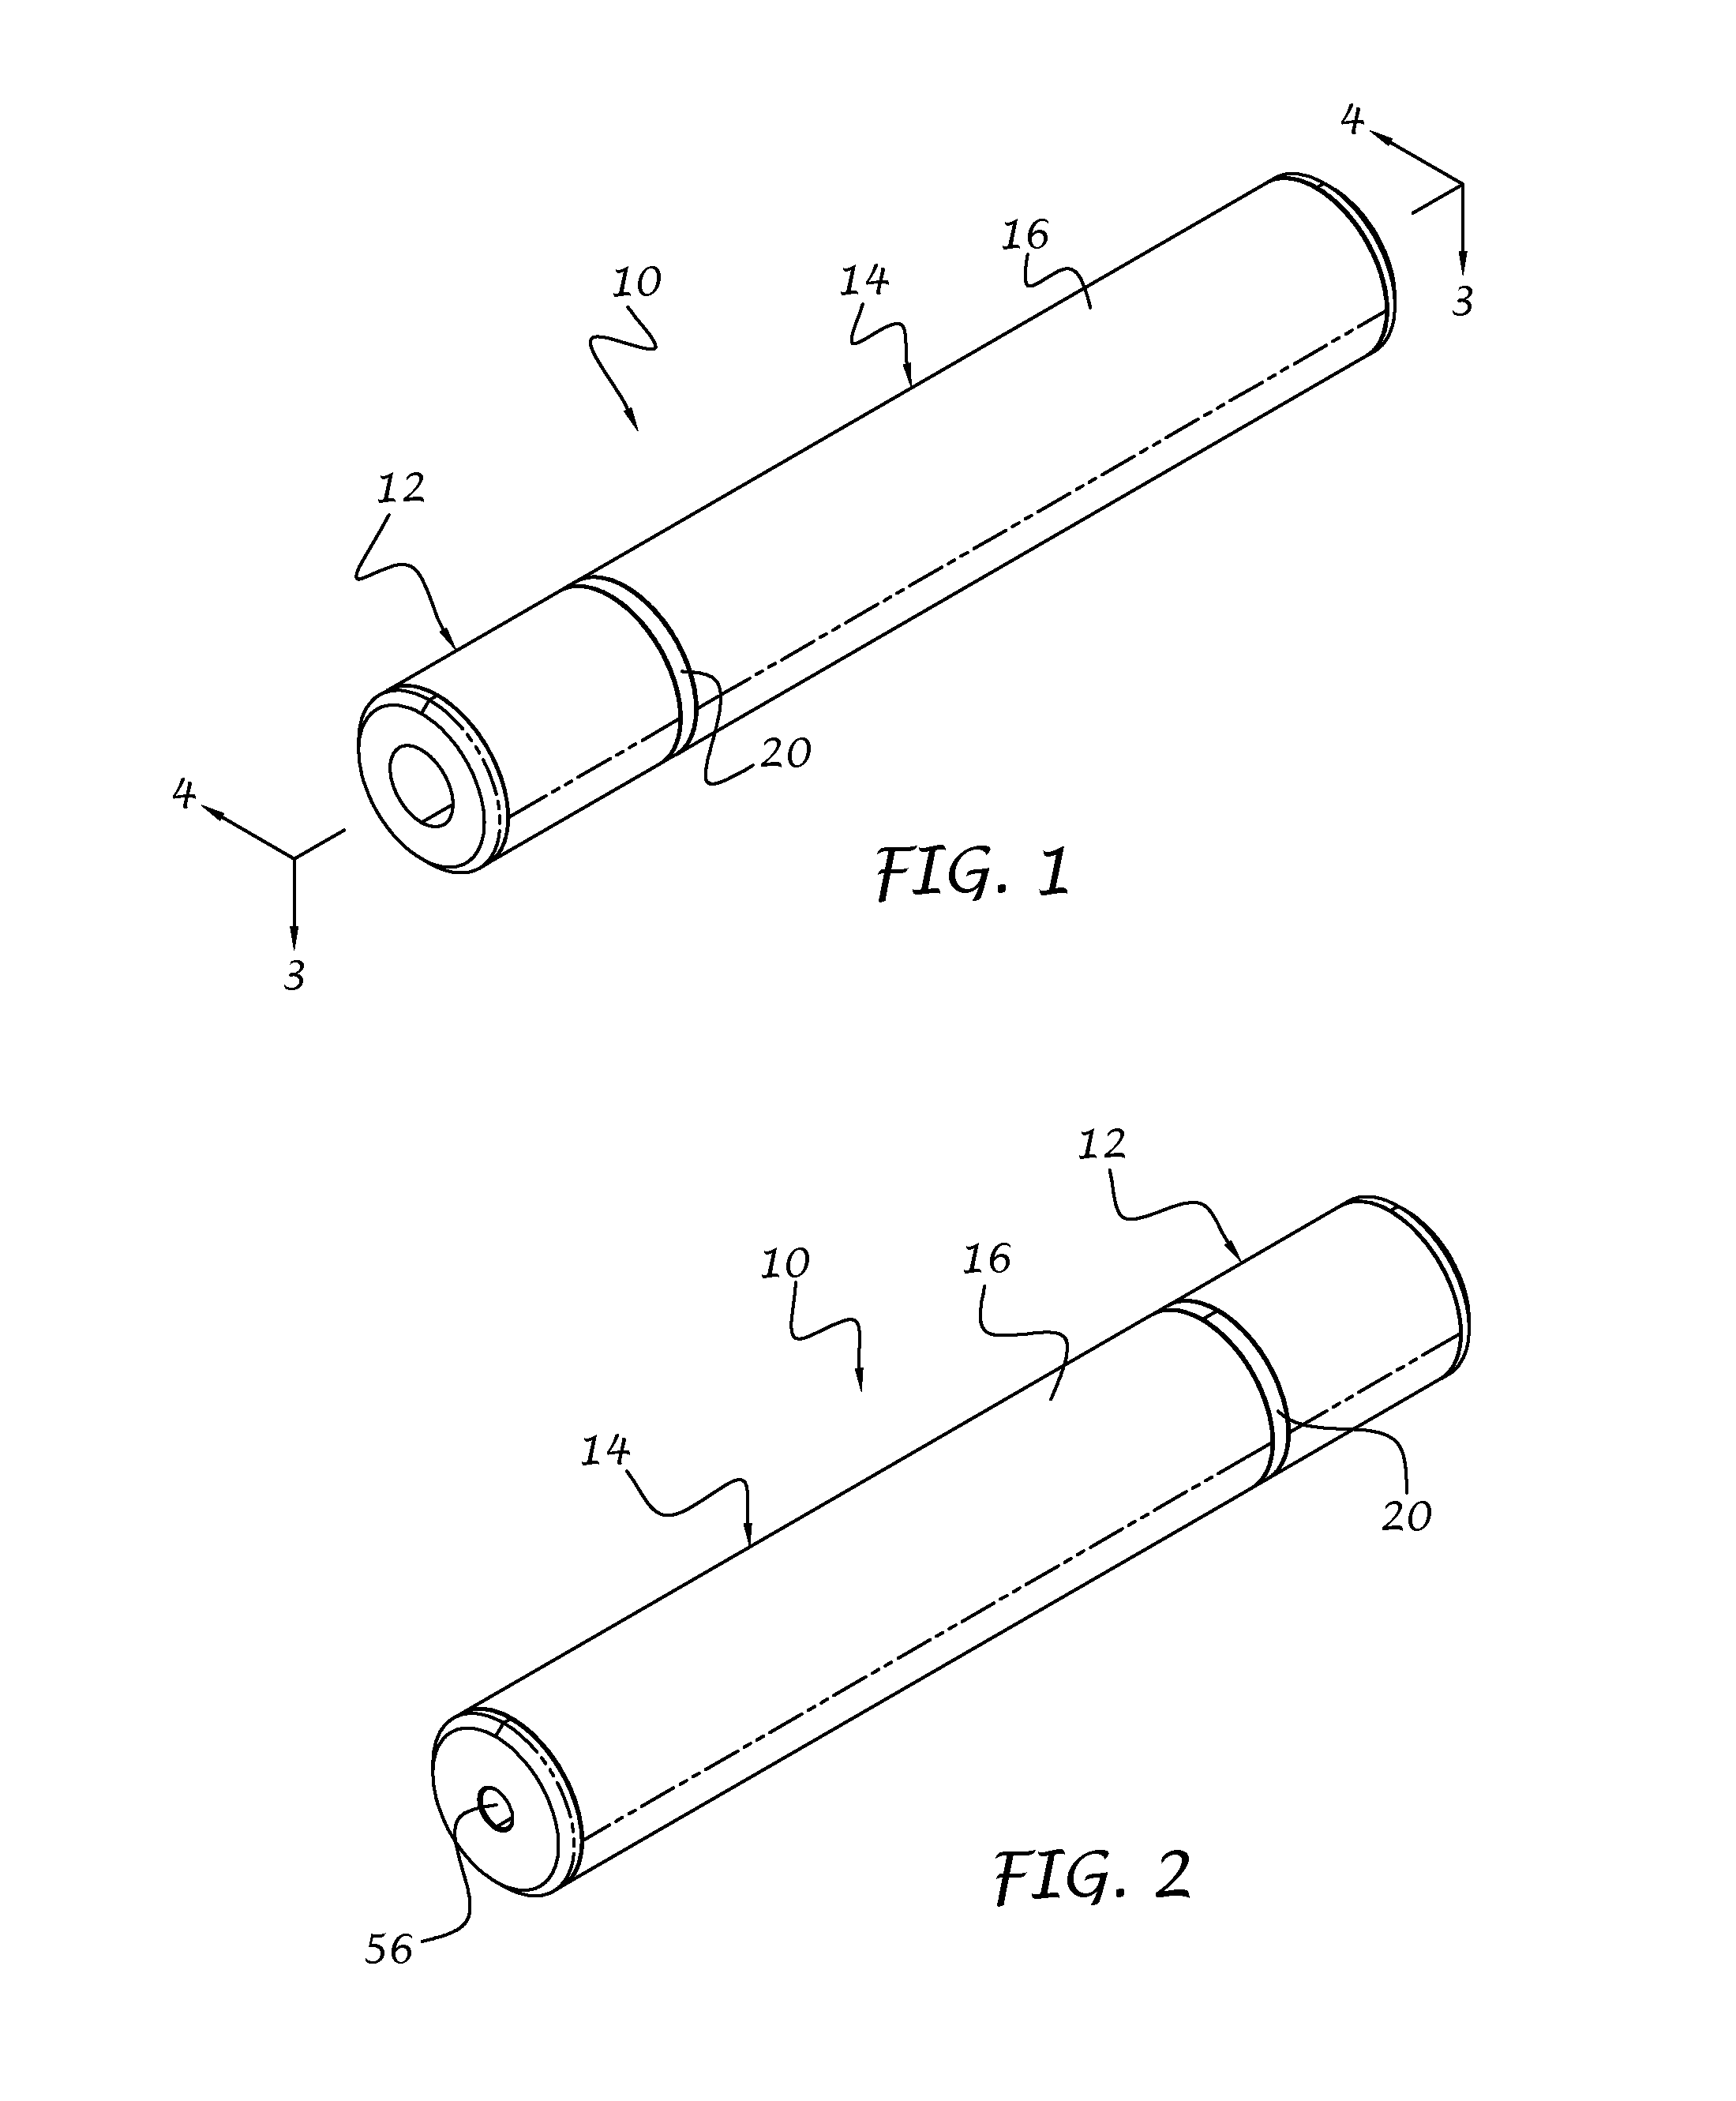 Firearm suppressor and injector assembly